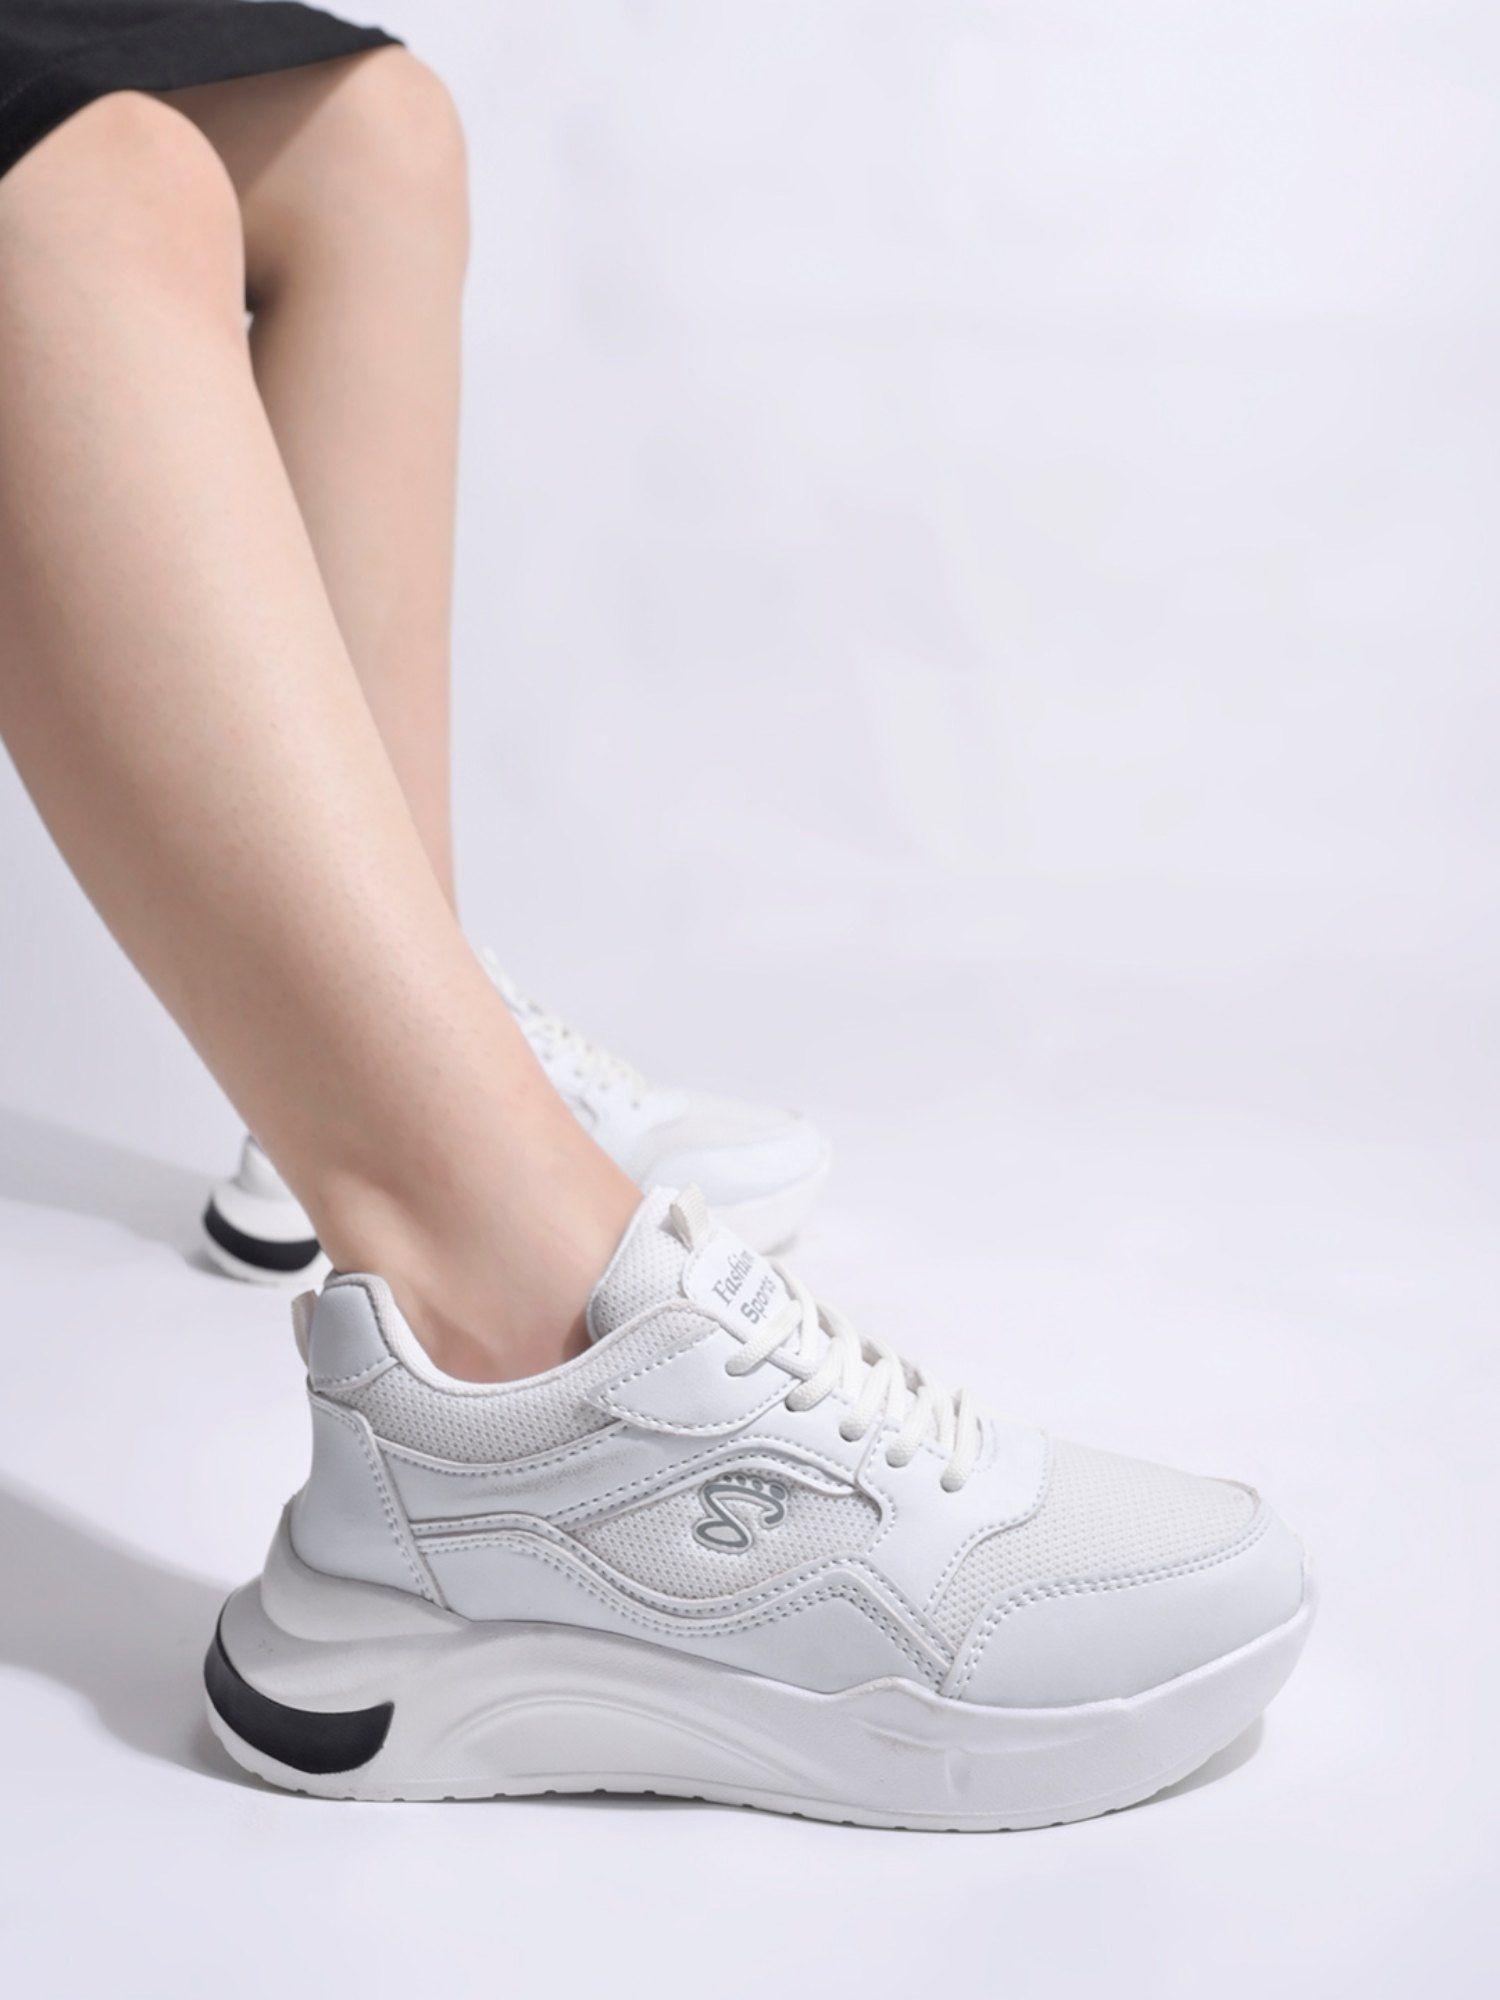 lace-up-comfortable-white-sports-shoes-for-girls